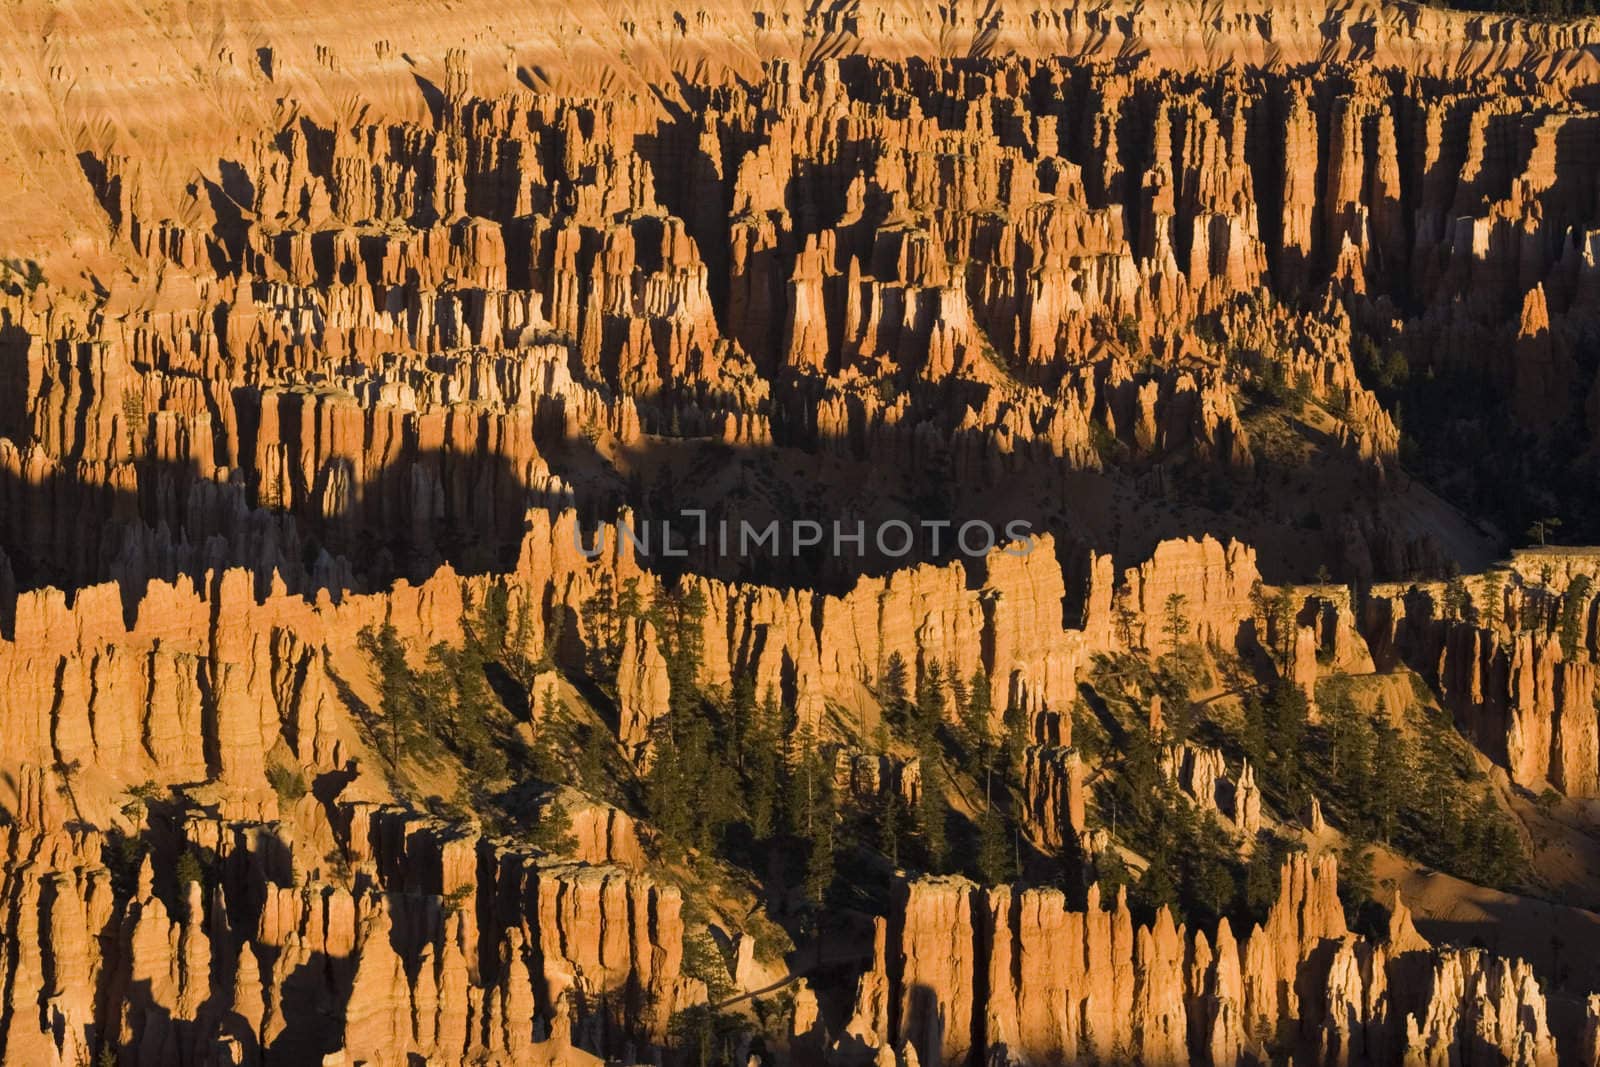 Bryce Canyon National Park in Utah - morning time.